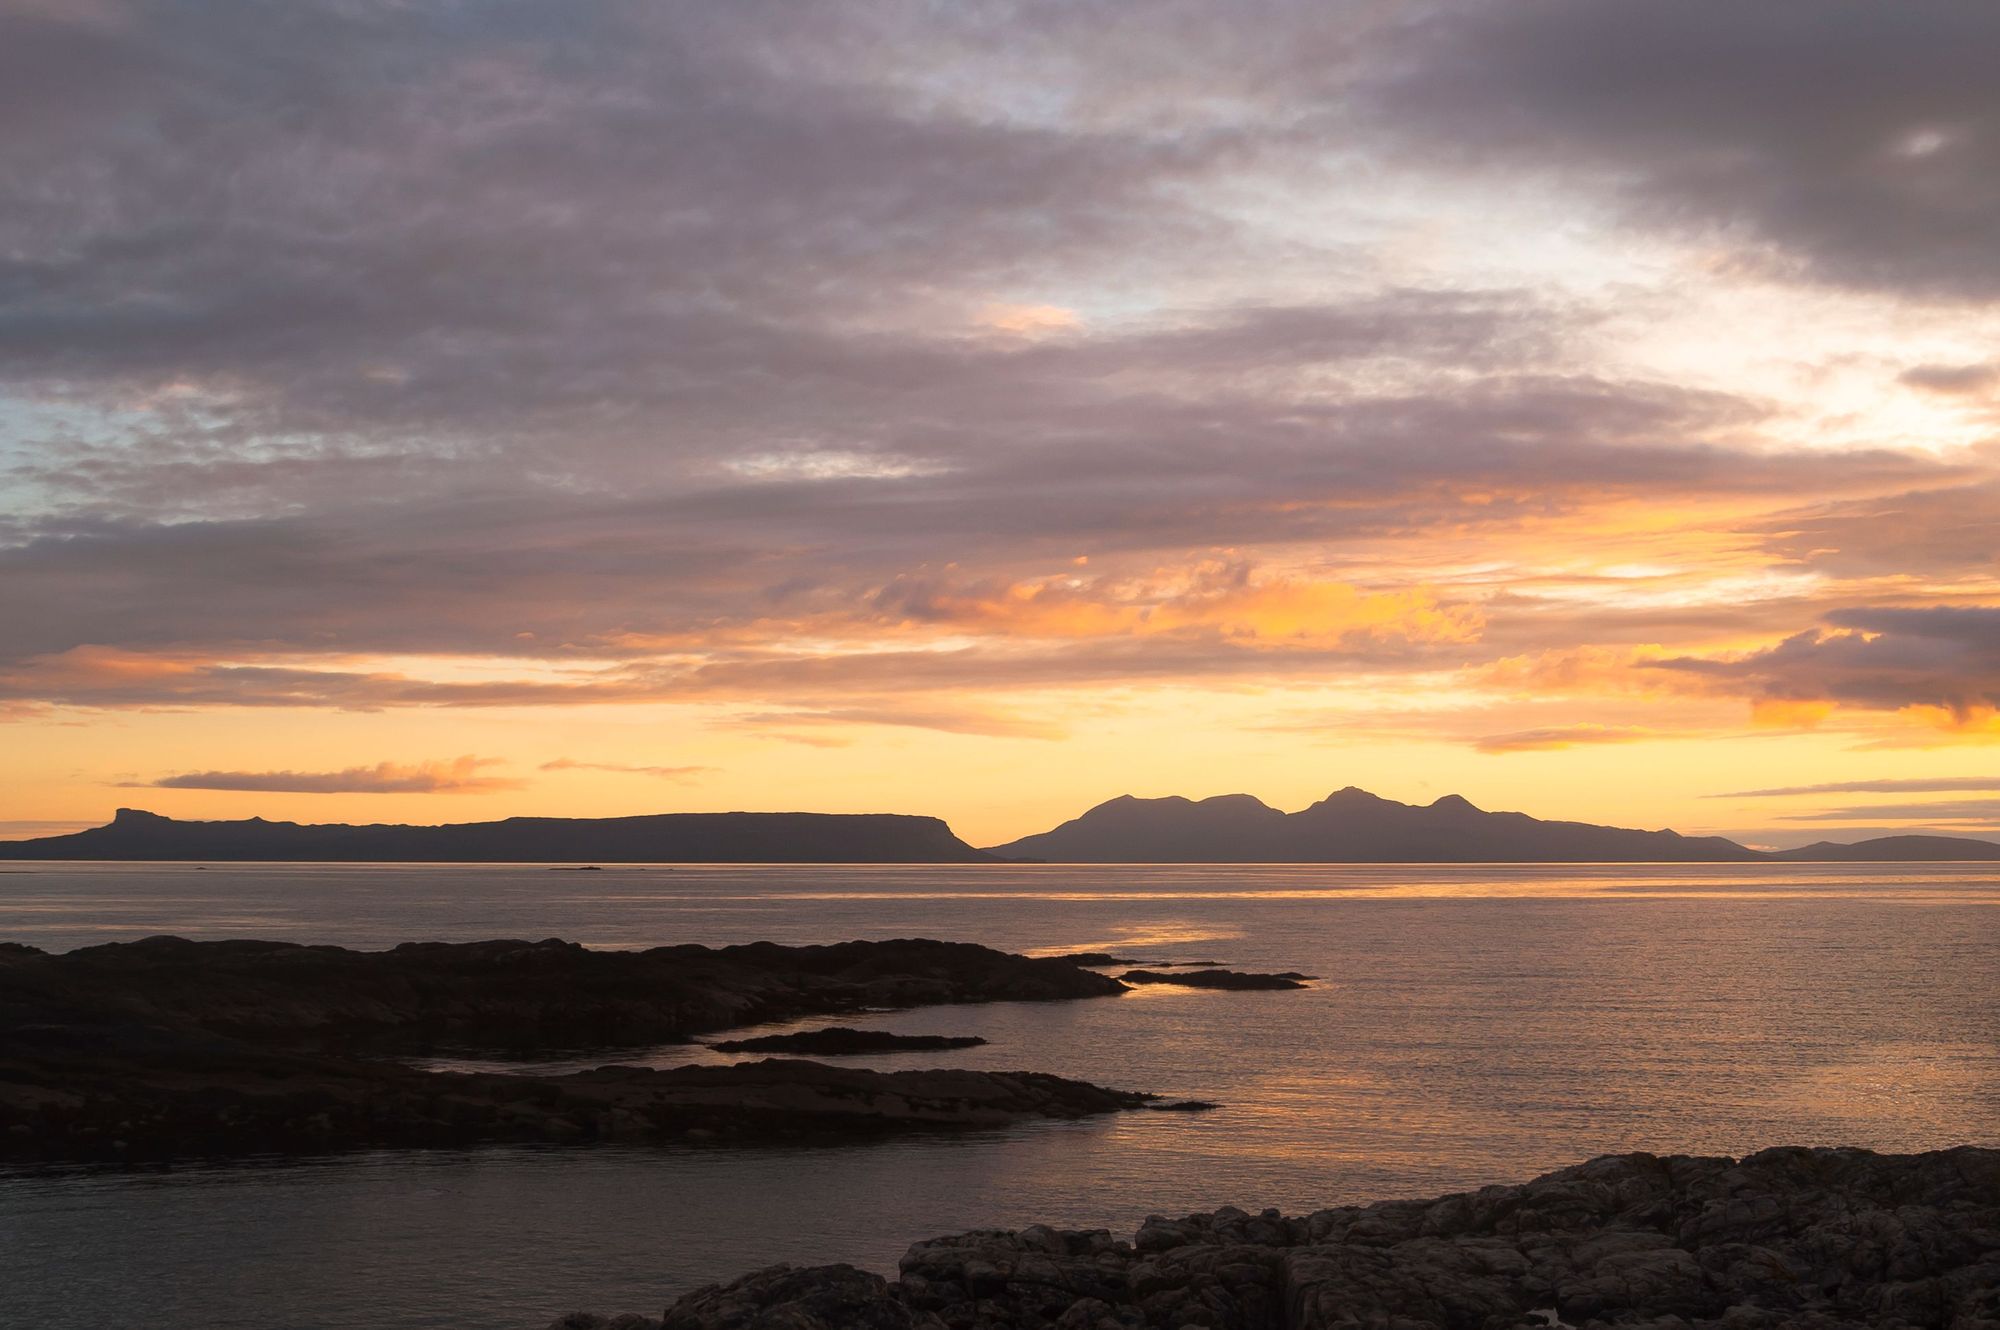 The dorsal fin and outline of Eigg, left, and the mountainous ridgeline of the Rum Cuillin, right, as the sun sets. Photo: Getty